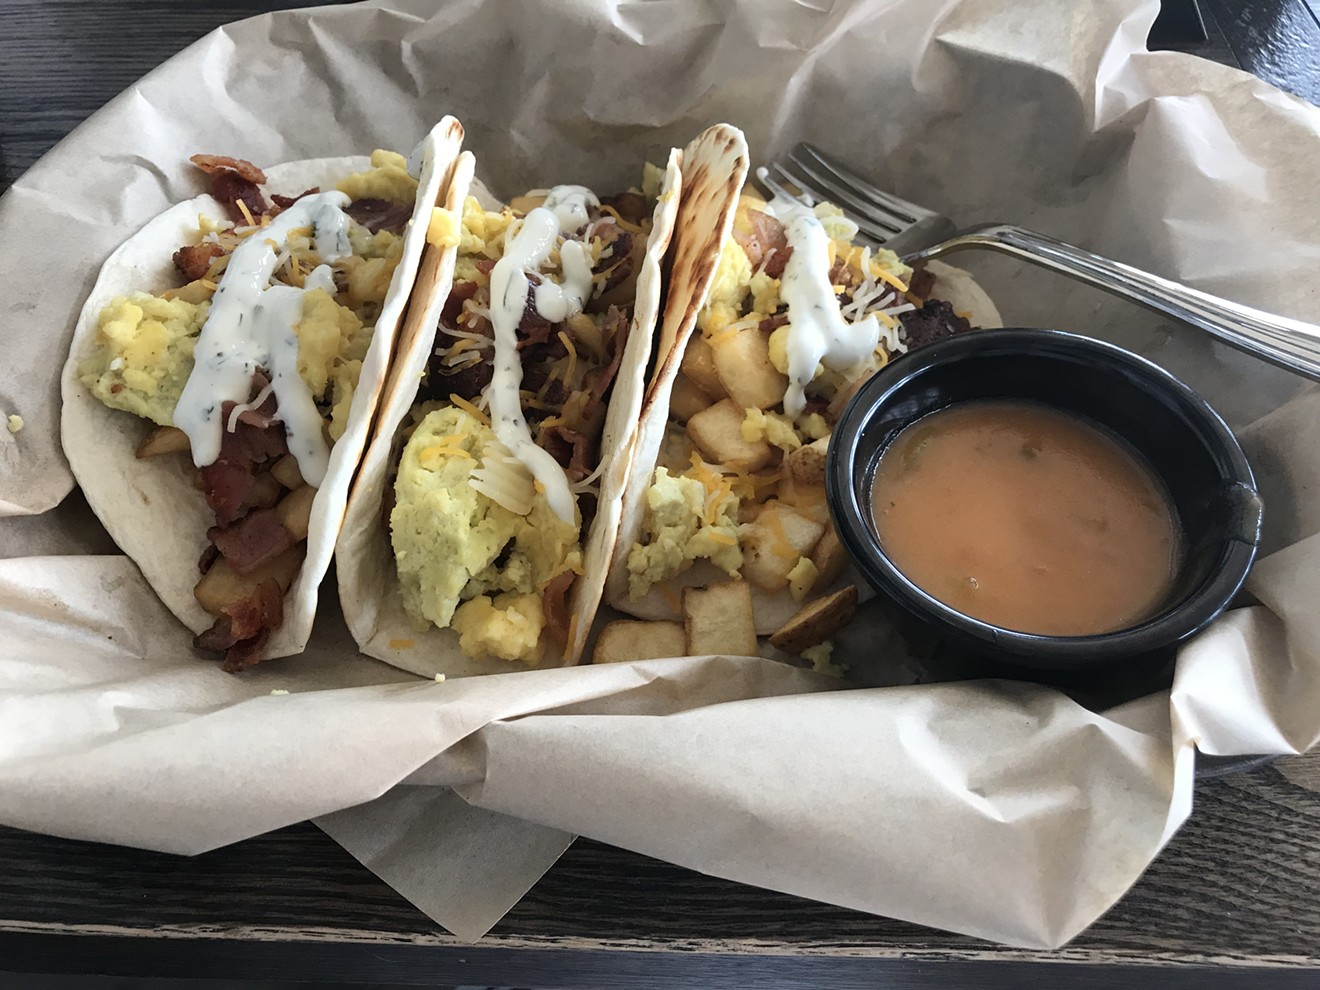 You don't have to go to Austin to find breakfast tacos.